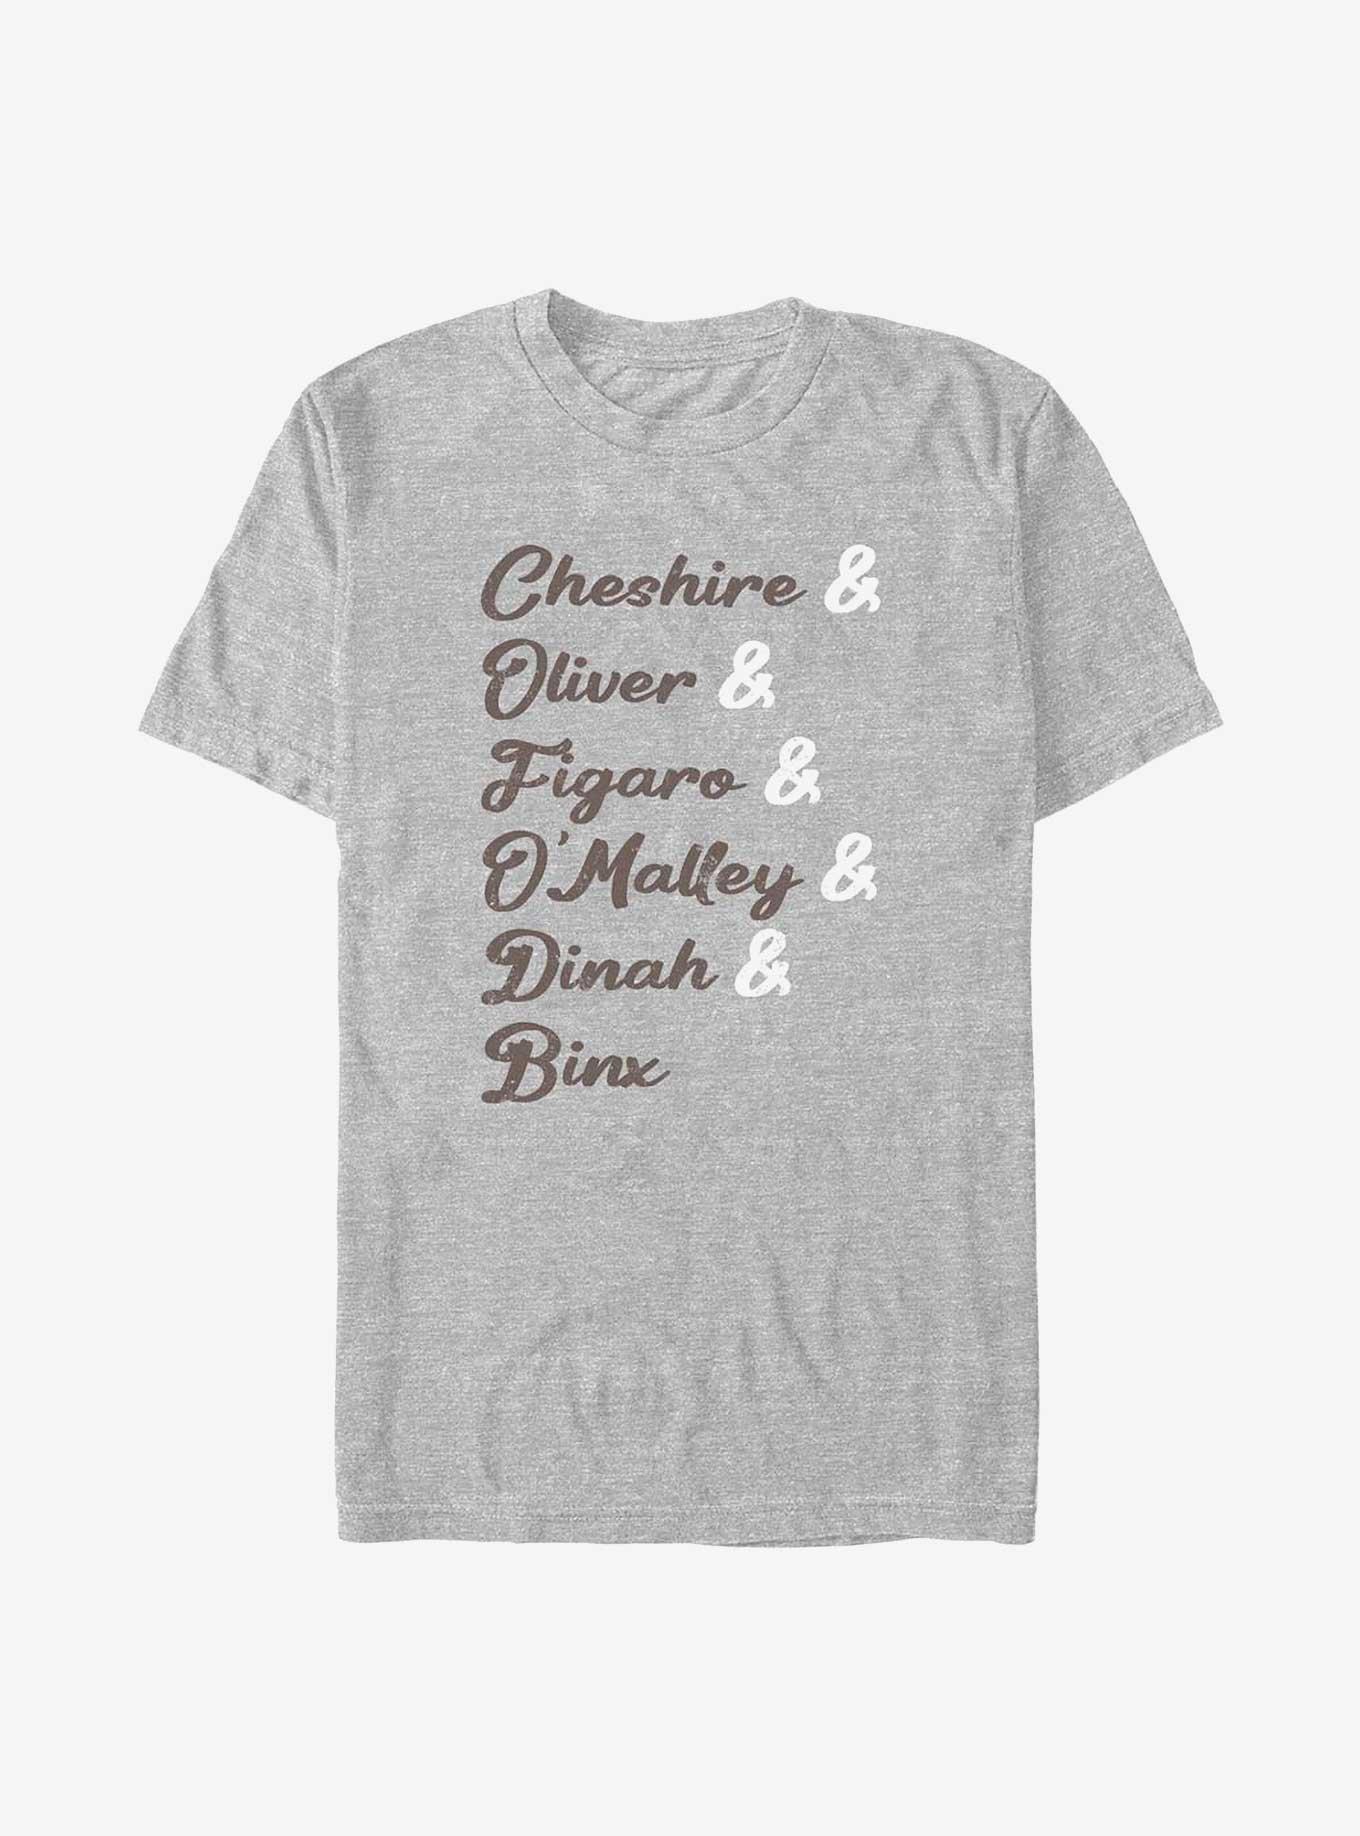 Disney Channel Cheshire, Oliver, Figaro, O'Malley, Dinah, Binx T-Shirt, ATH HTR, hi-res